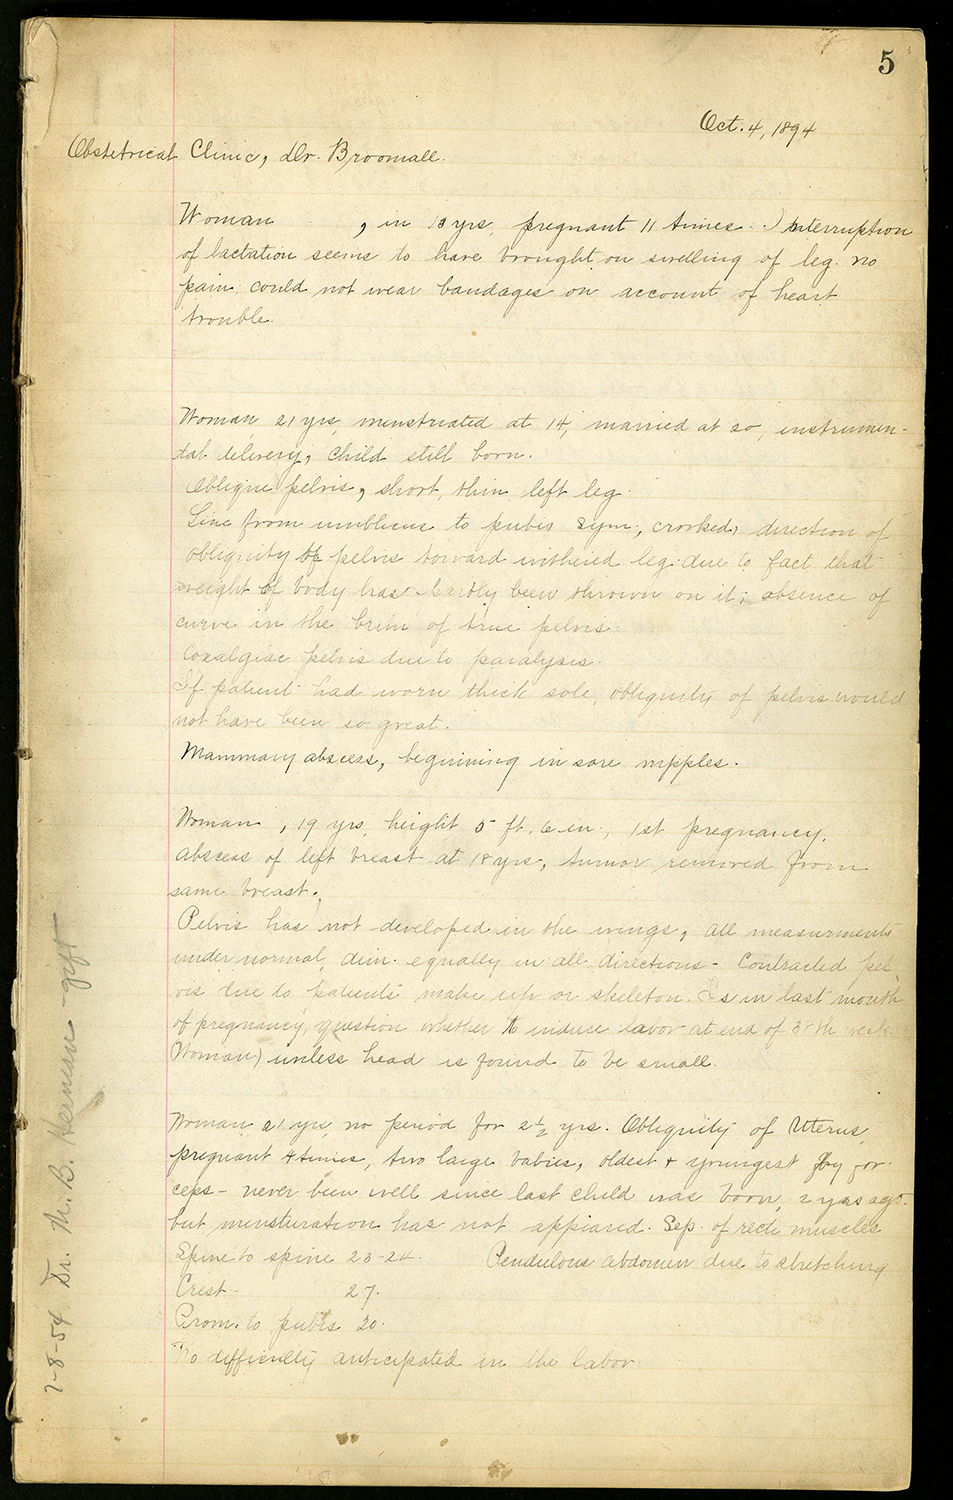 Clinical lecture notes from a student in Dr. Broomall’s class, October 1894 (The Legacy Center Archives and Special Collections)